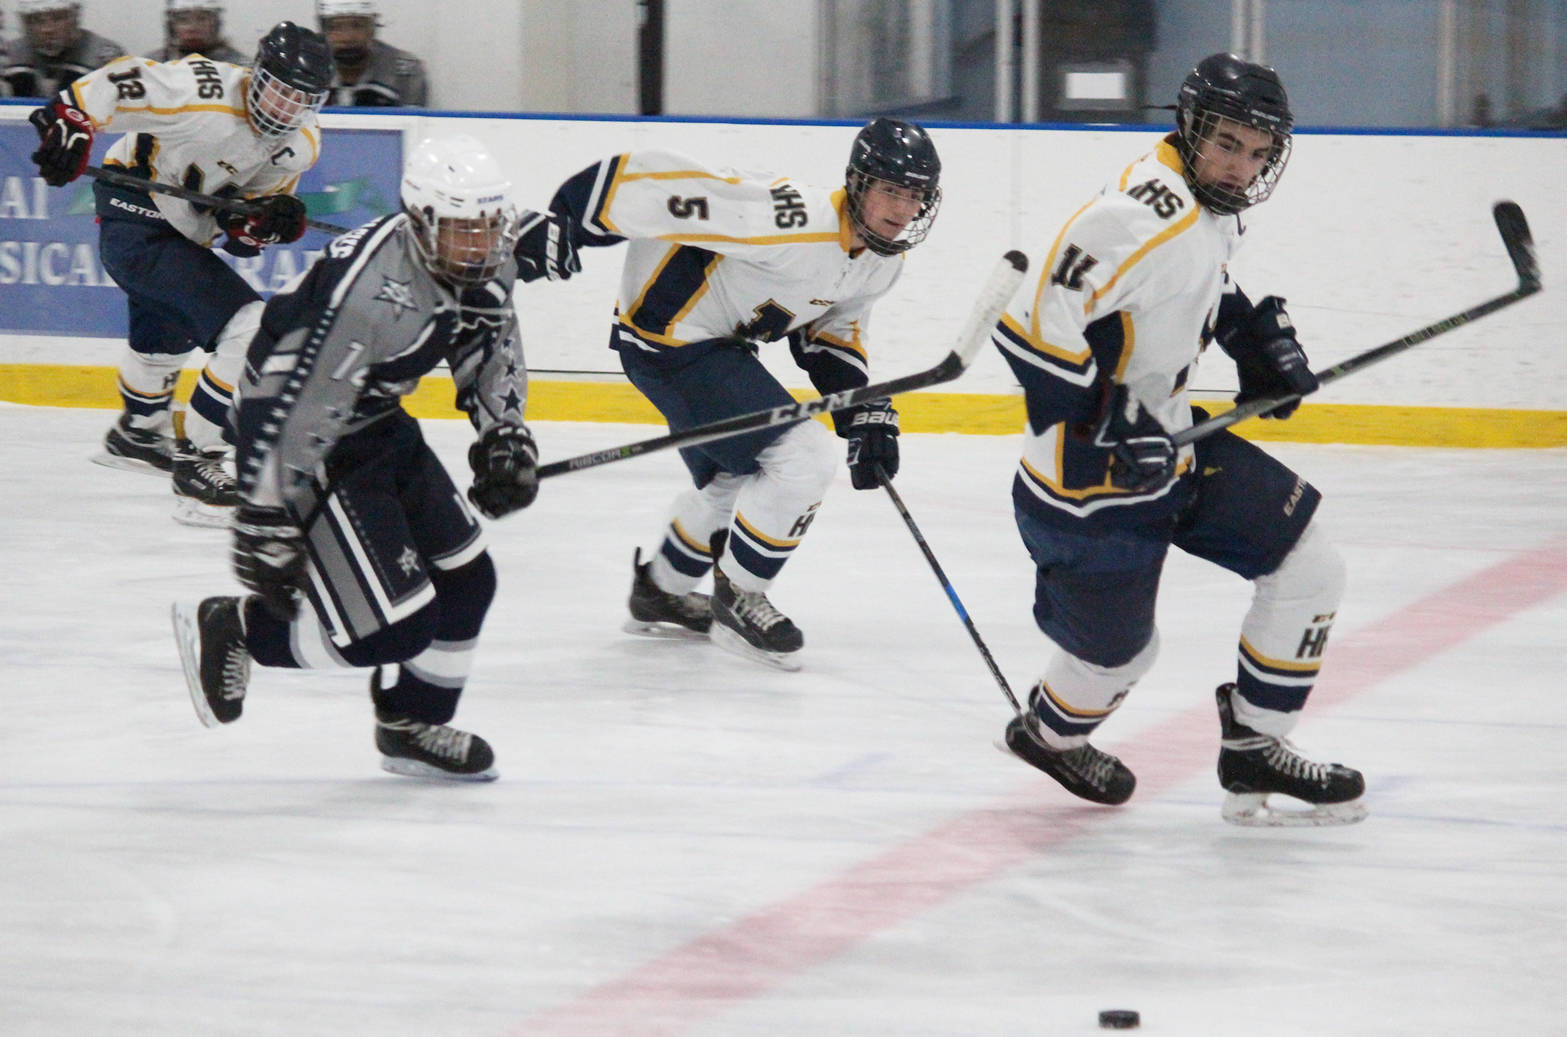 Homer hockey players Dimitry Kuzmin (12), Douglas Dean (5) and Charlie Menke (11) chase after the puck along with Soldotna’s Alex Montague during their game Tuesday, Jan. 16, 2017, at Kevin Bell Arena in Homer. The Mariners beat the Stars 10-1. (Photo by Megan Pacer/Homer News)